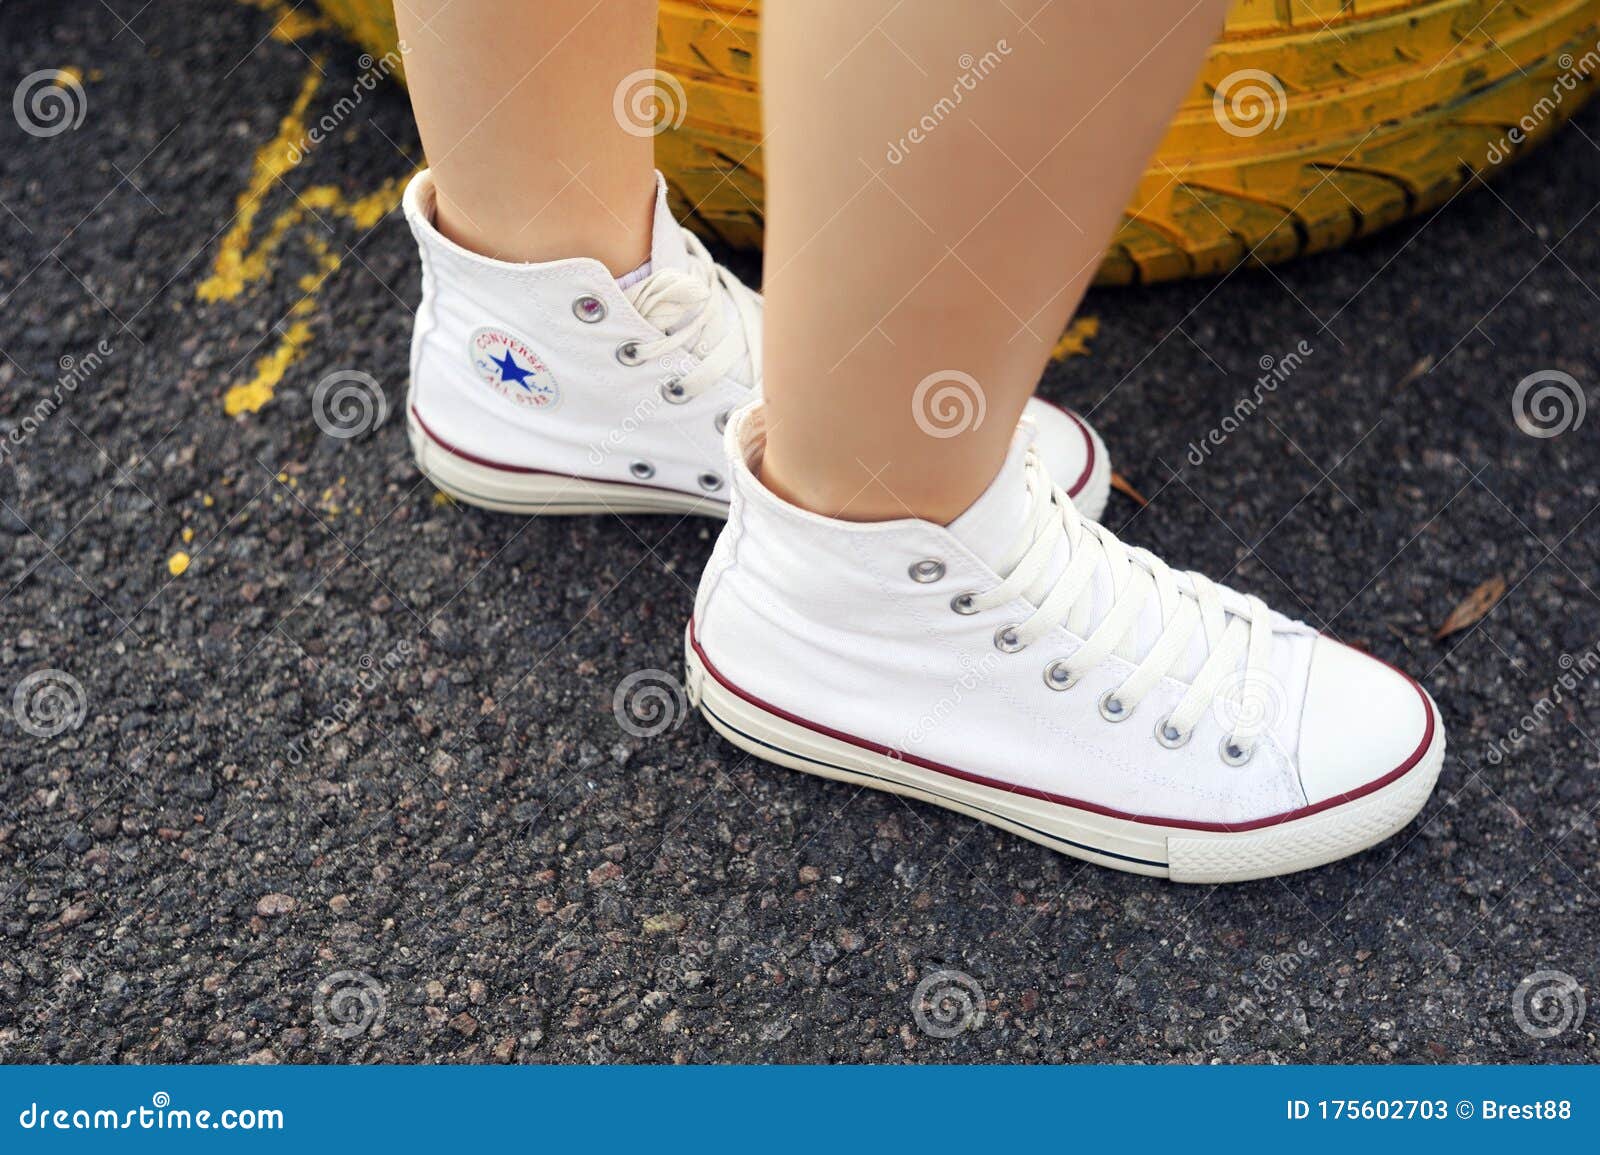 Belarus, Minsk - June 27, 2019: a Girl in White Cloth Converse Sneakers  Stands on Old Car Tires. Editorial Stock Photo - Image of footwear,  company: 175602703